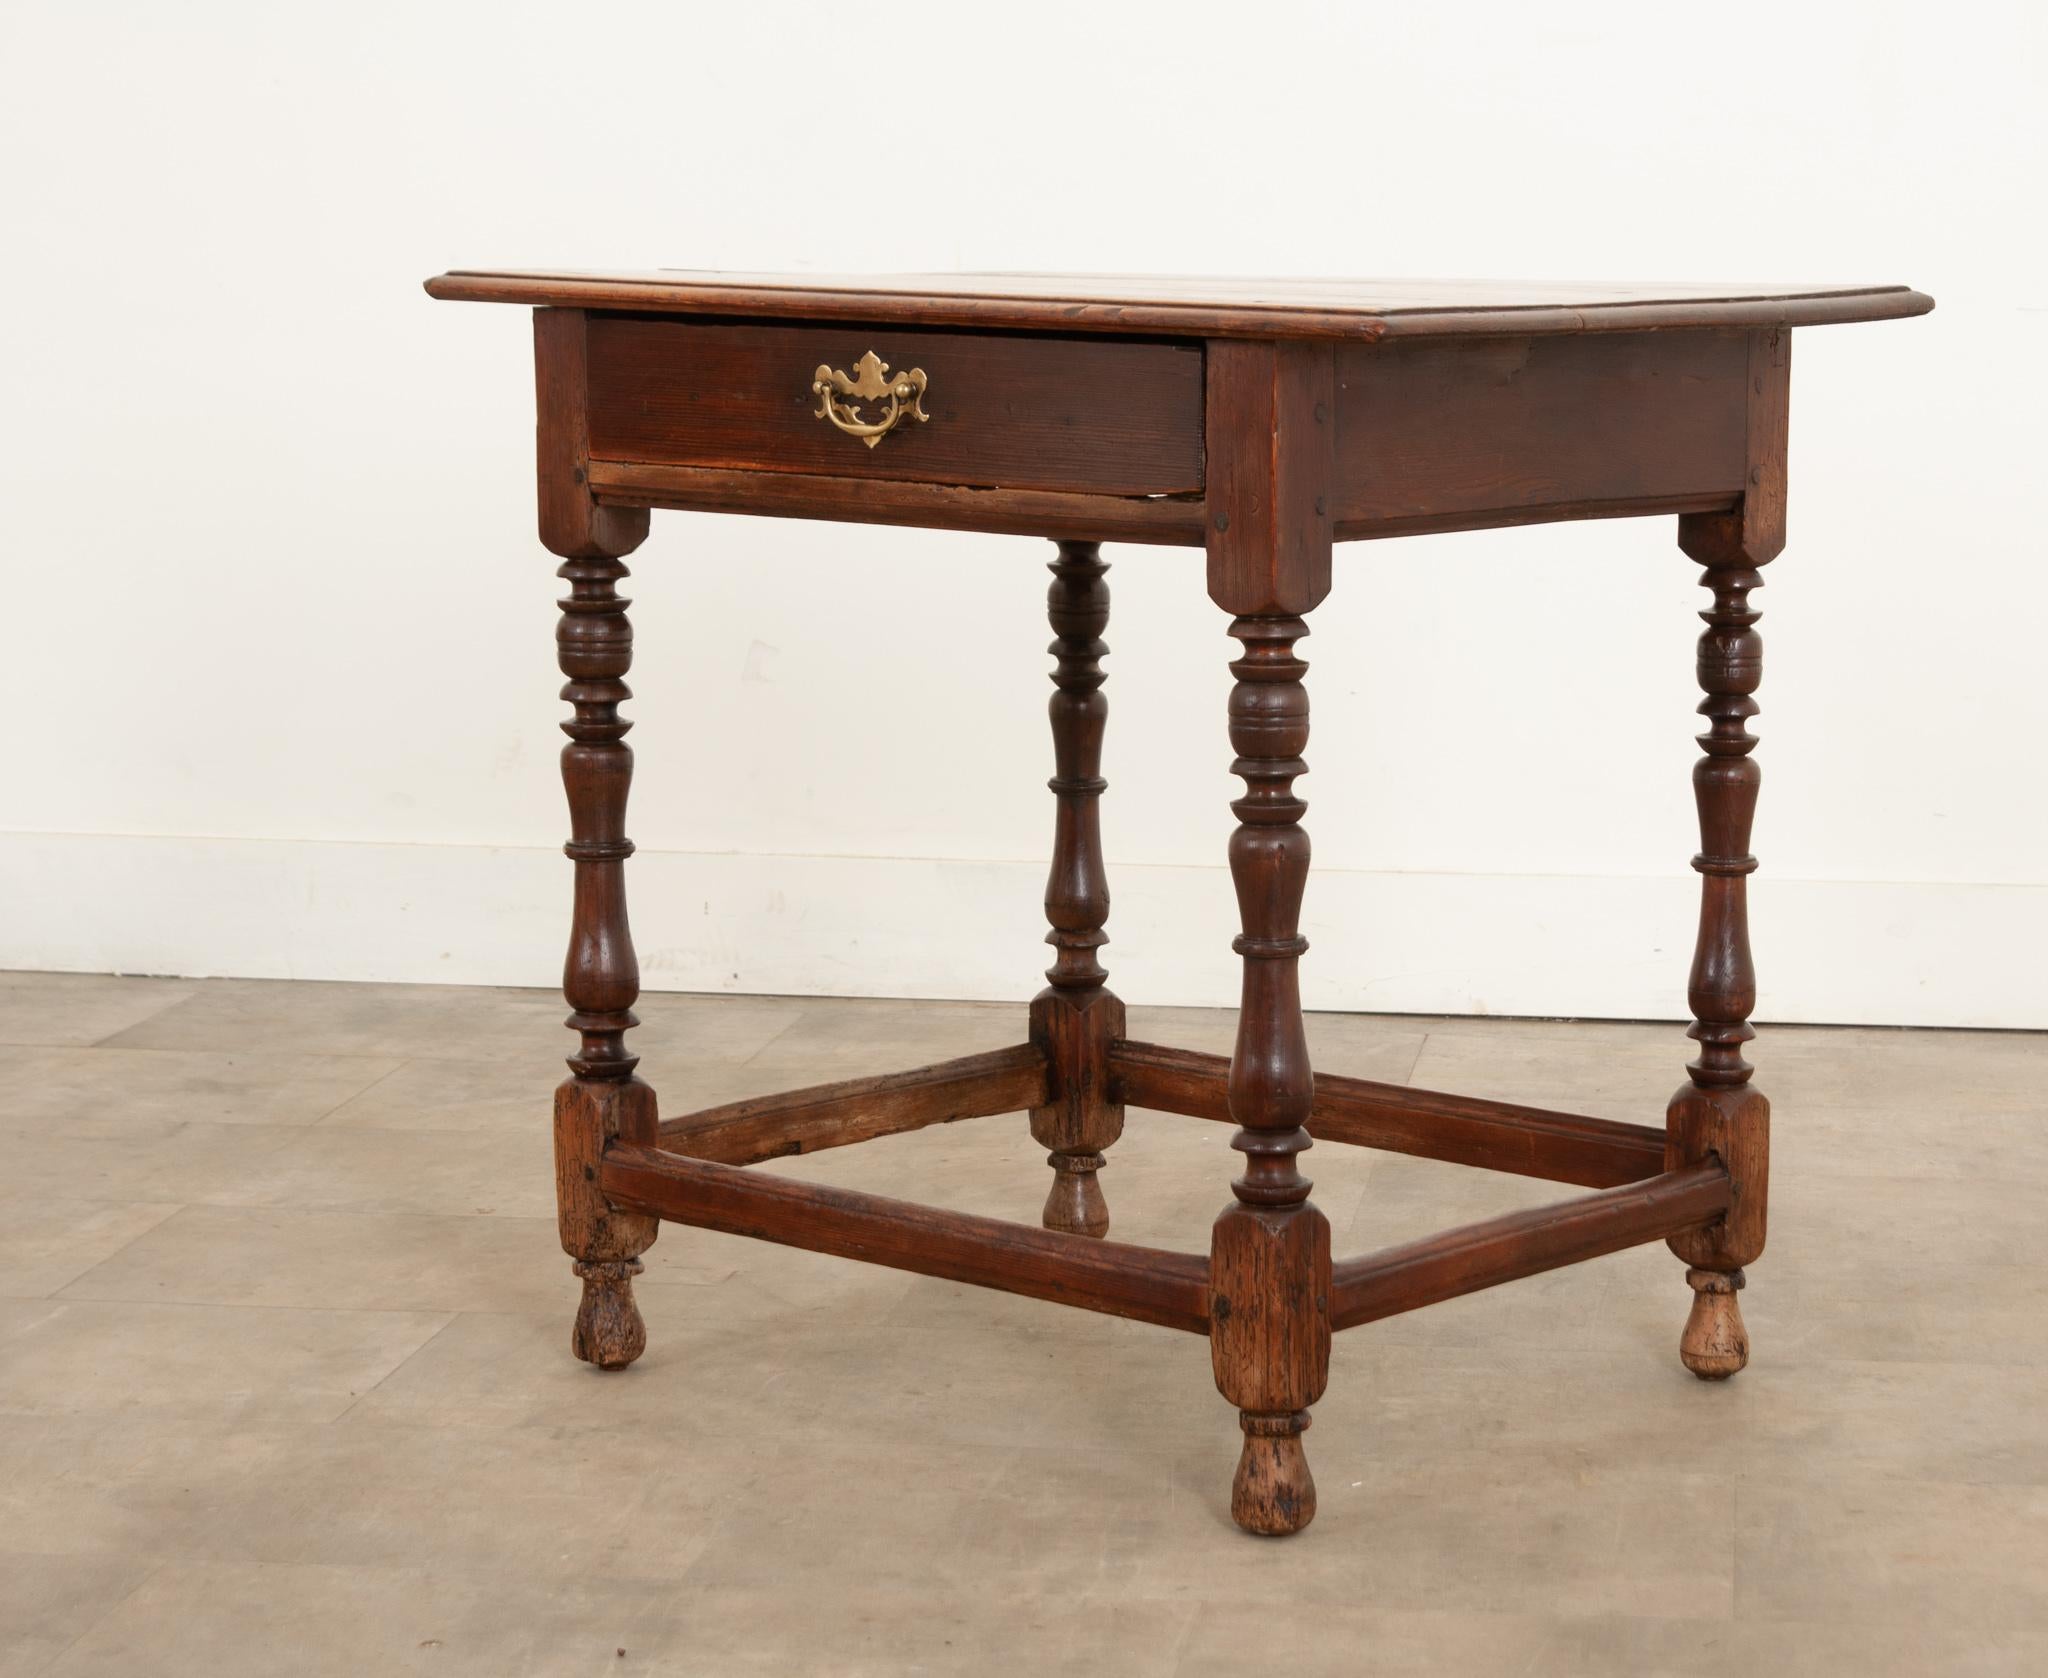 An English side table made from pine in the 1700s. This lovely little table features a rectangular top made using three boards with an ogee edge, nailed and pegged to a simple, straight apron that houses a single drawer in front with a brass winged